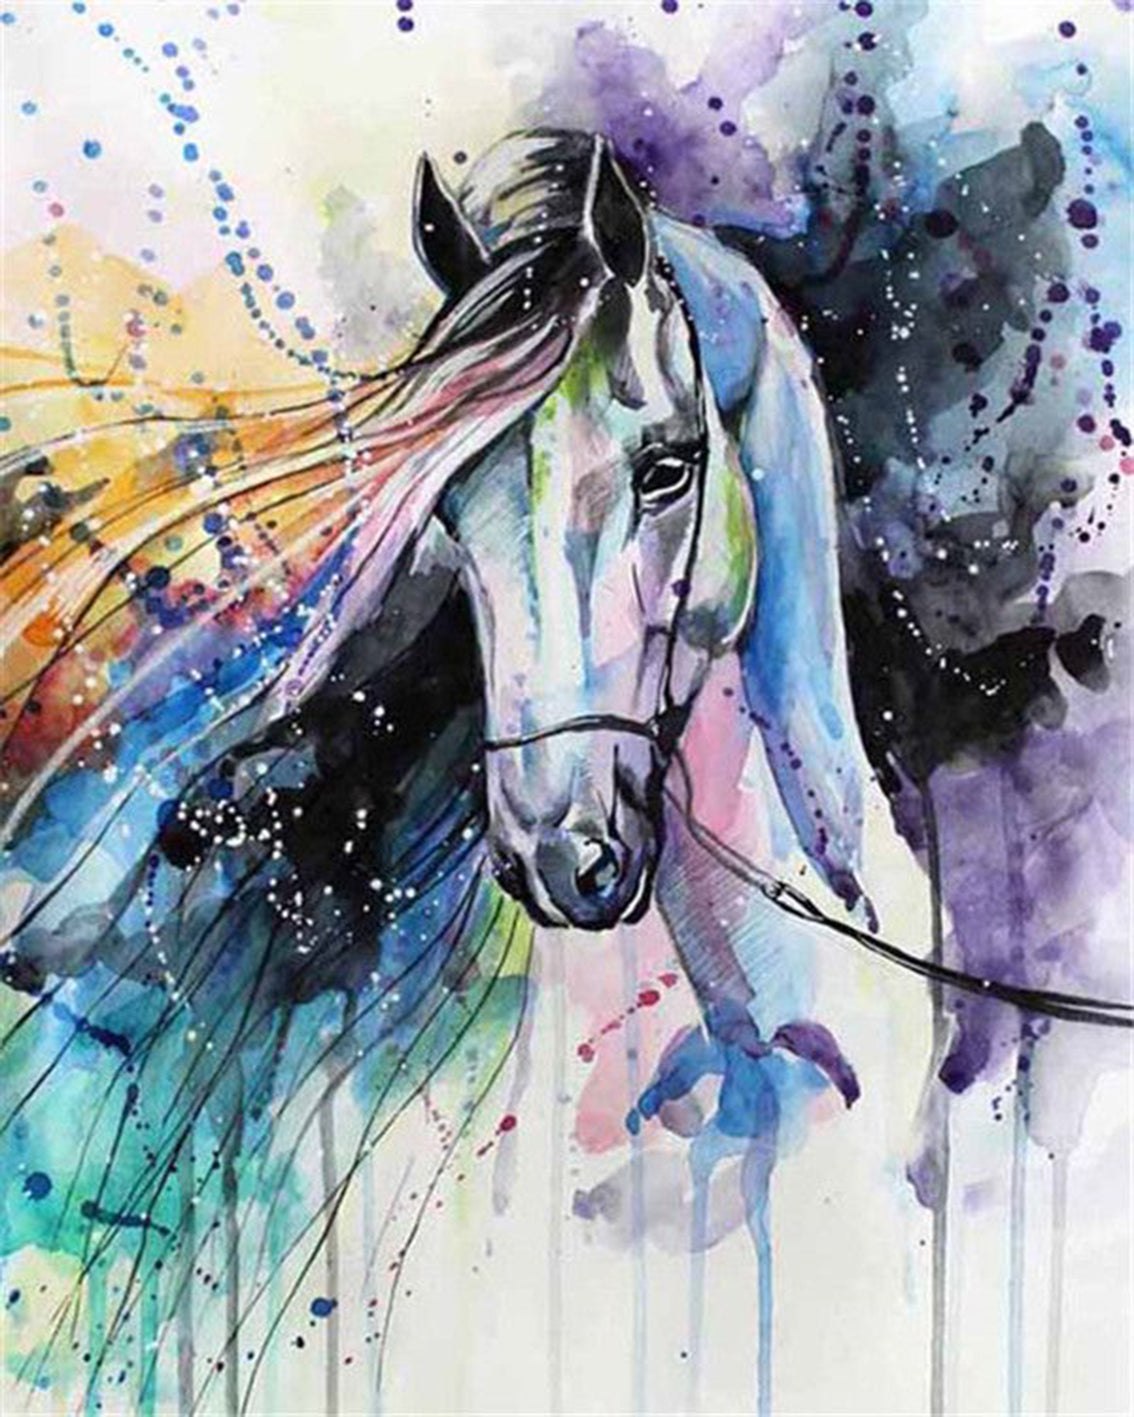 Paint By Numbers Starter Bundle - Paint Splatter Colourful Horses Paint By Numbers